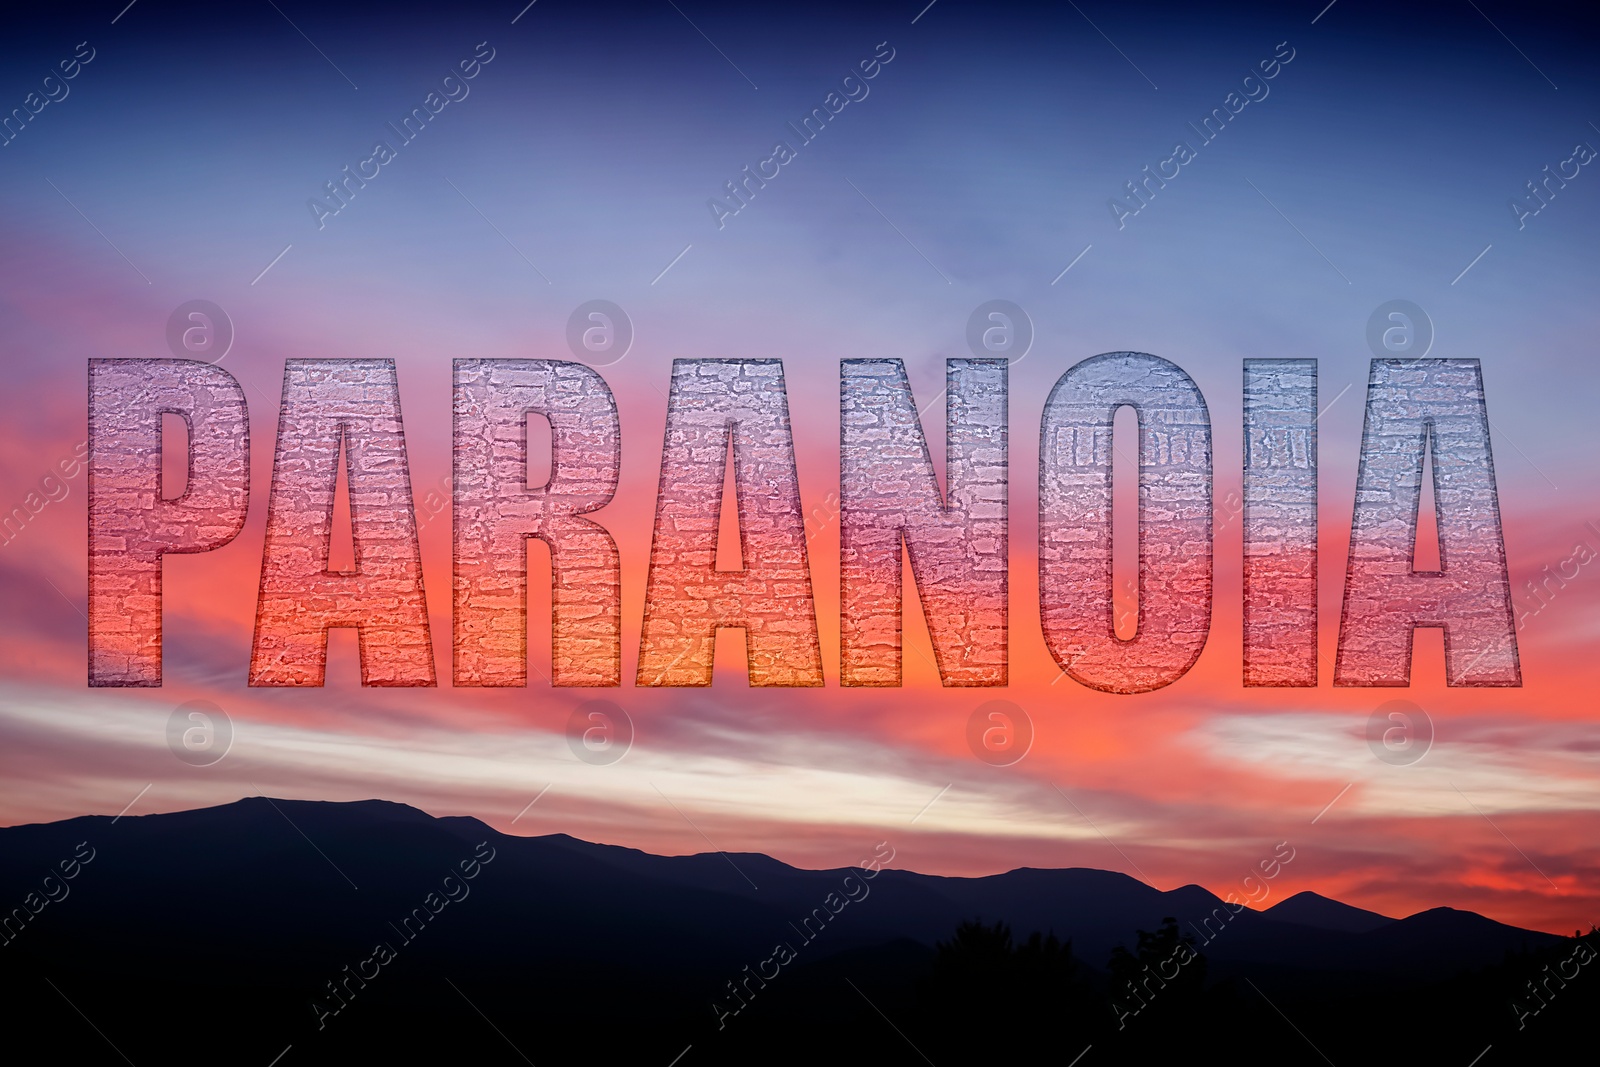 Image of Mental disorder. Translucent word Paranoia with brick texture against mountains under sky at sunset